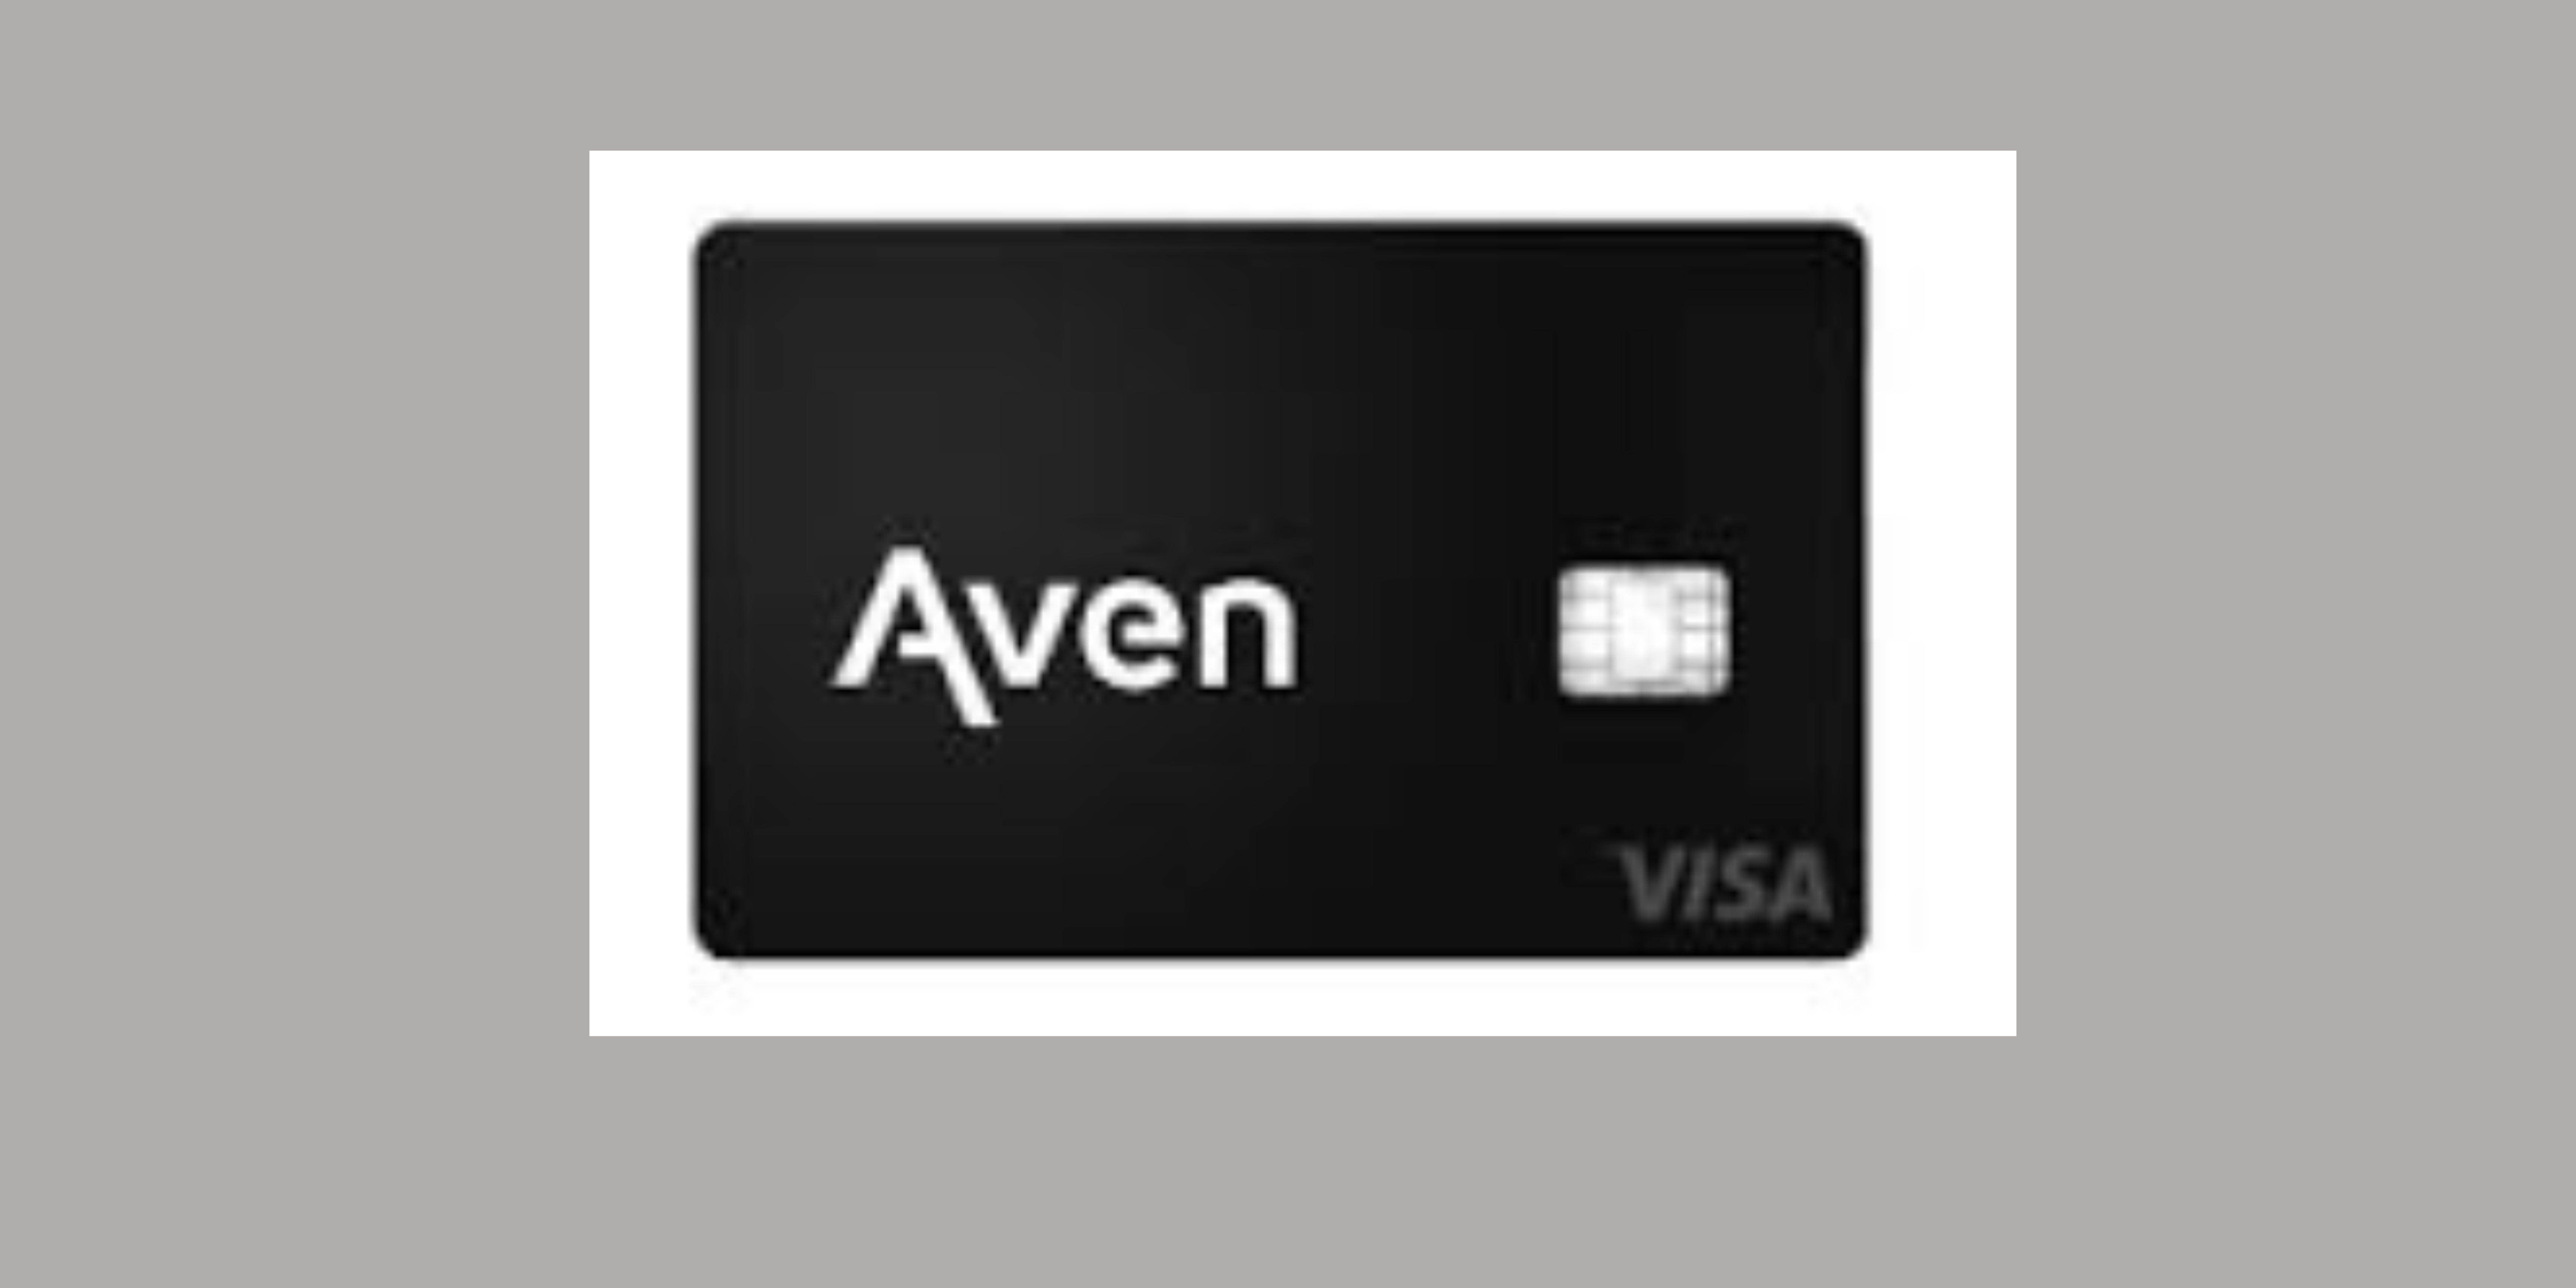 Aven Heloc card-Visa in all black with white background